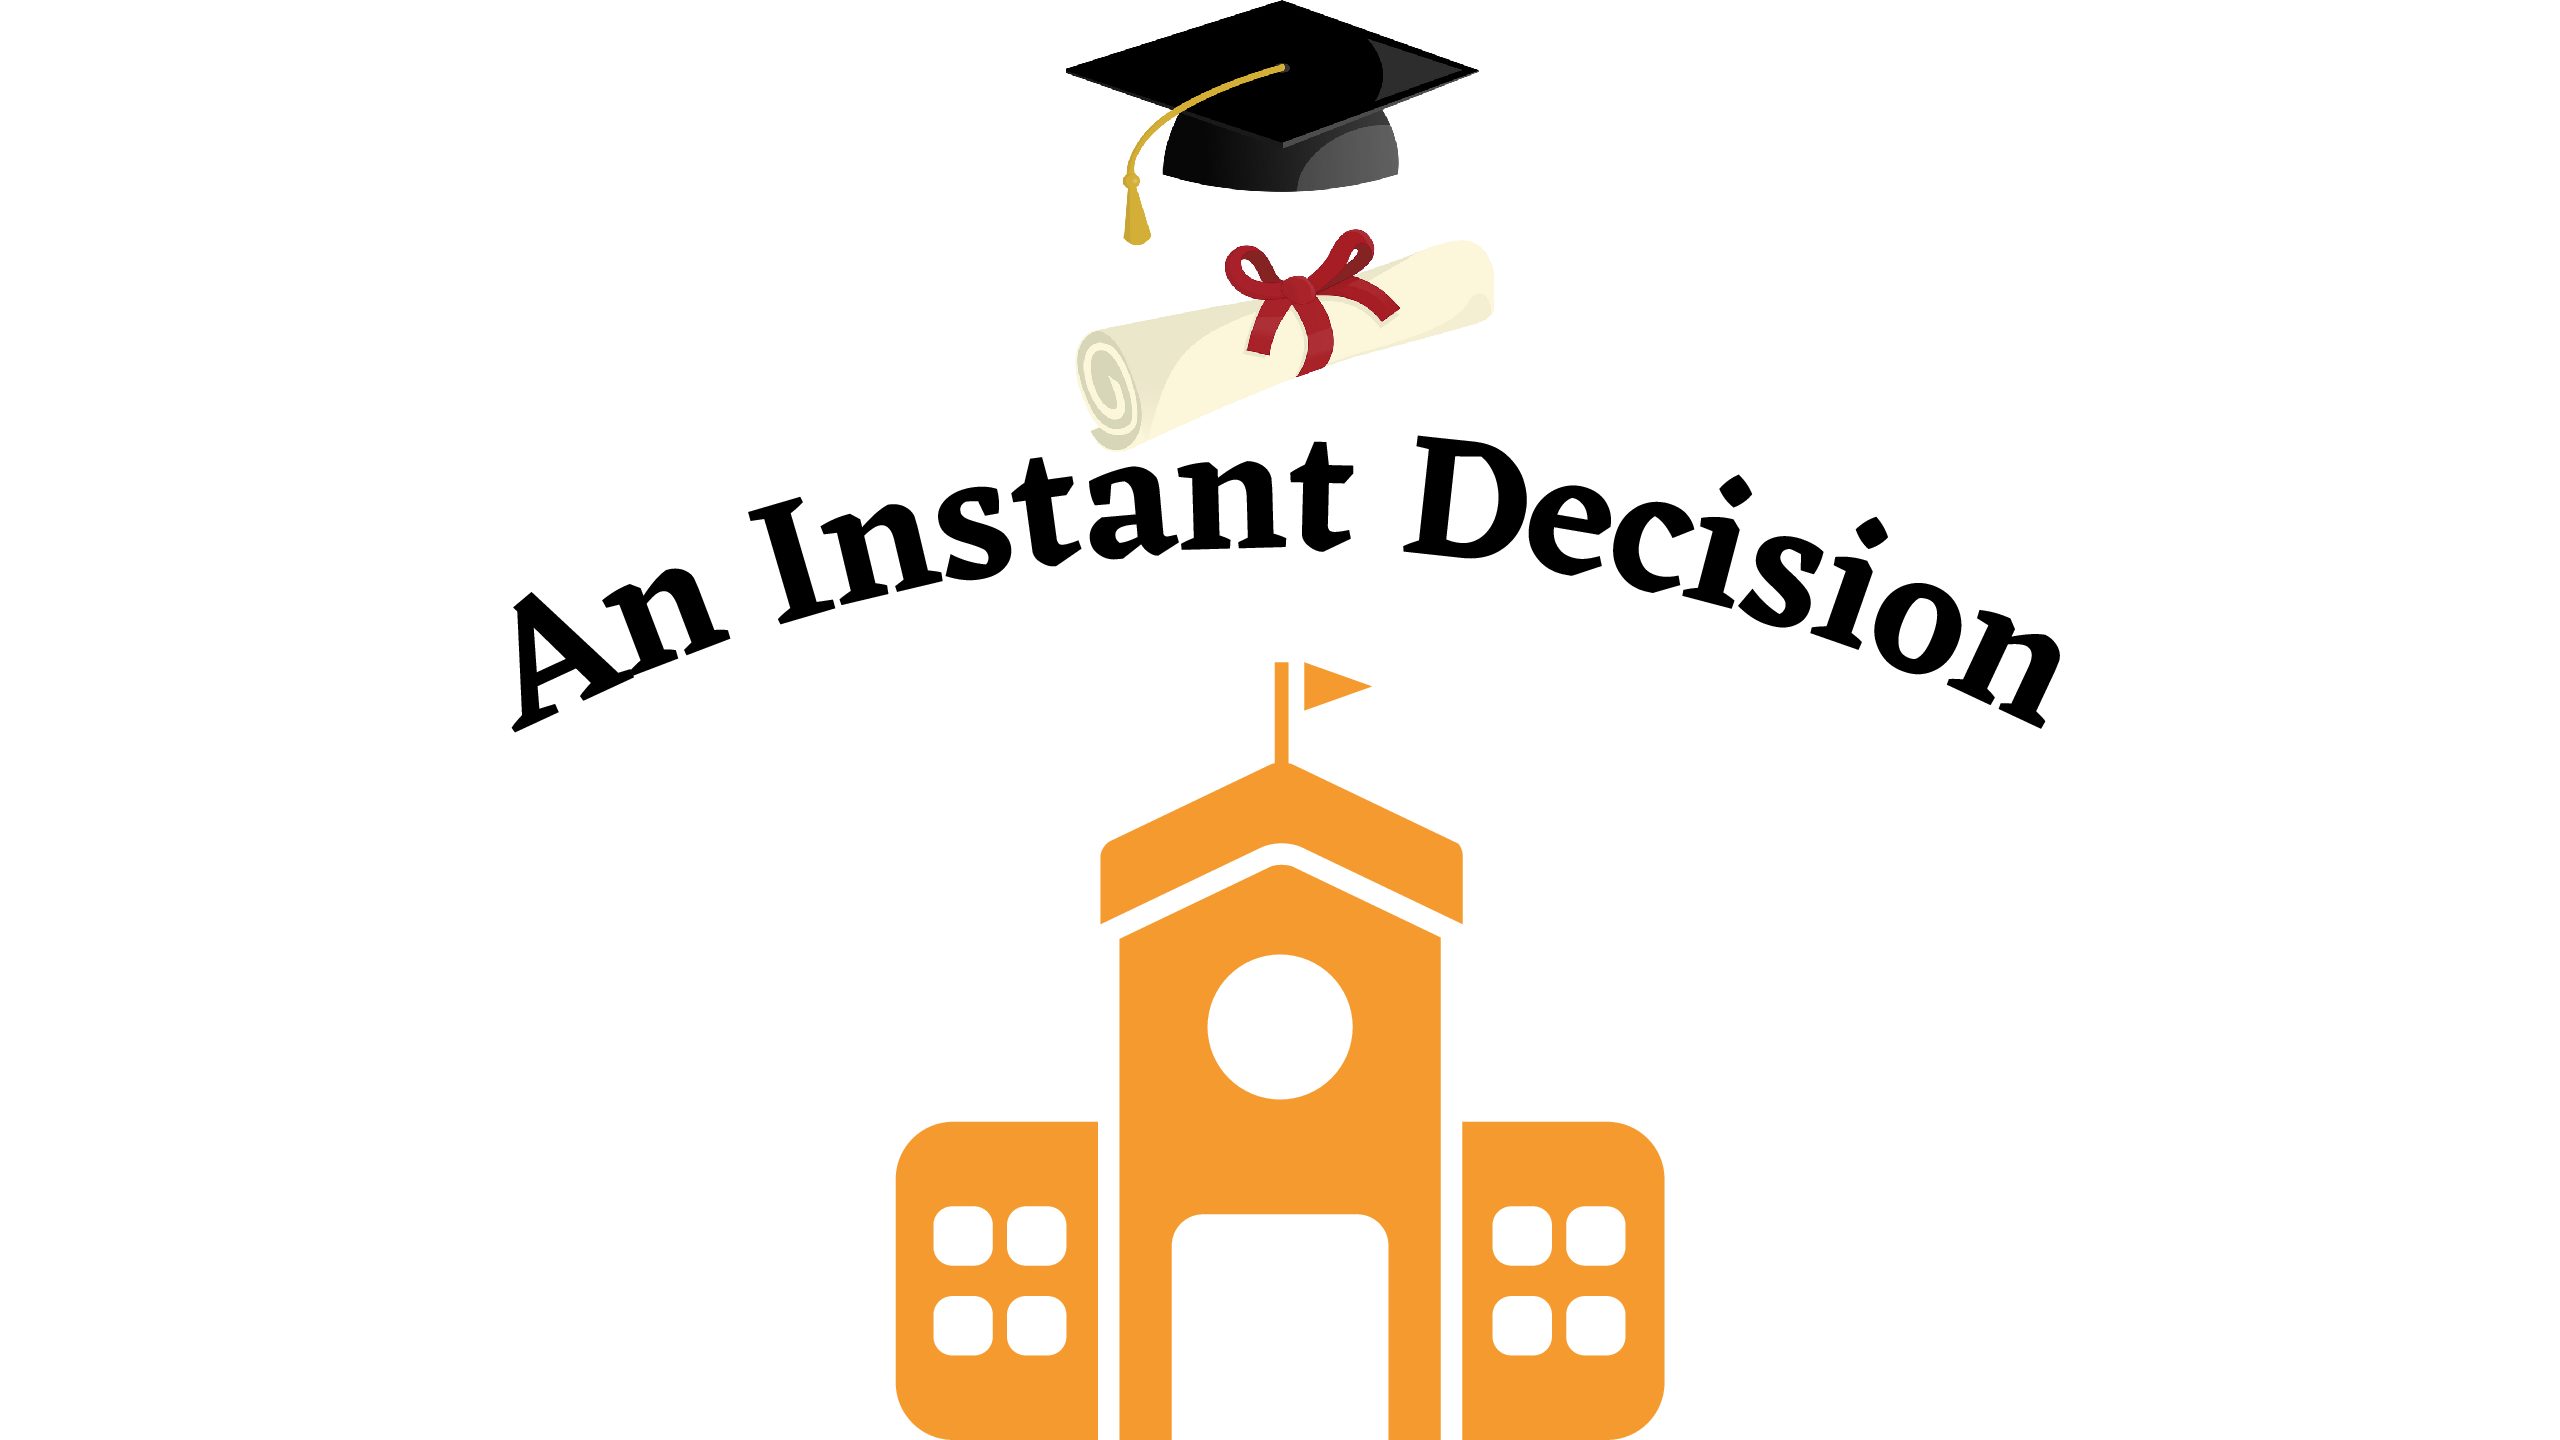 Arrive, Apply, Accepted: Instant Decision Day 2021